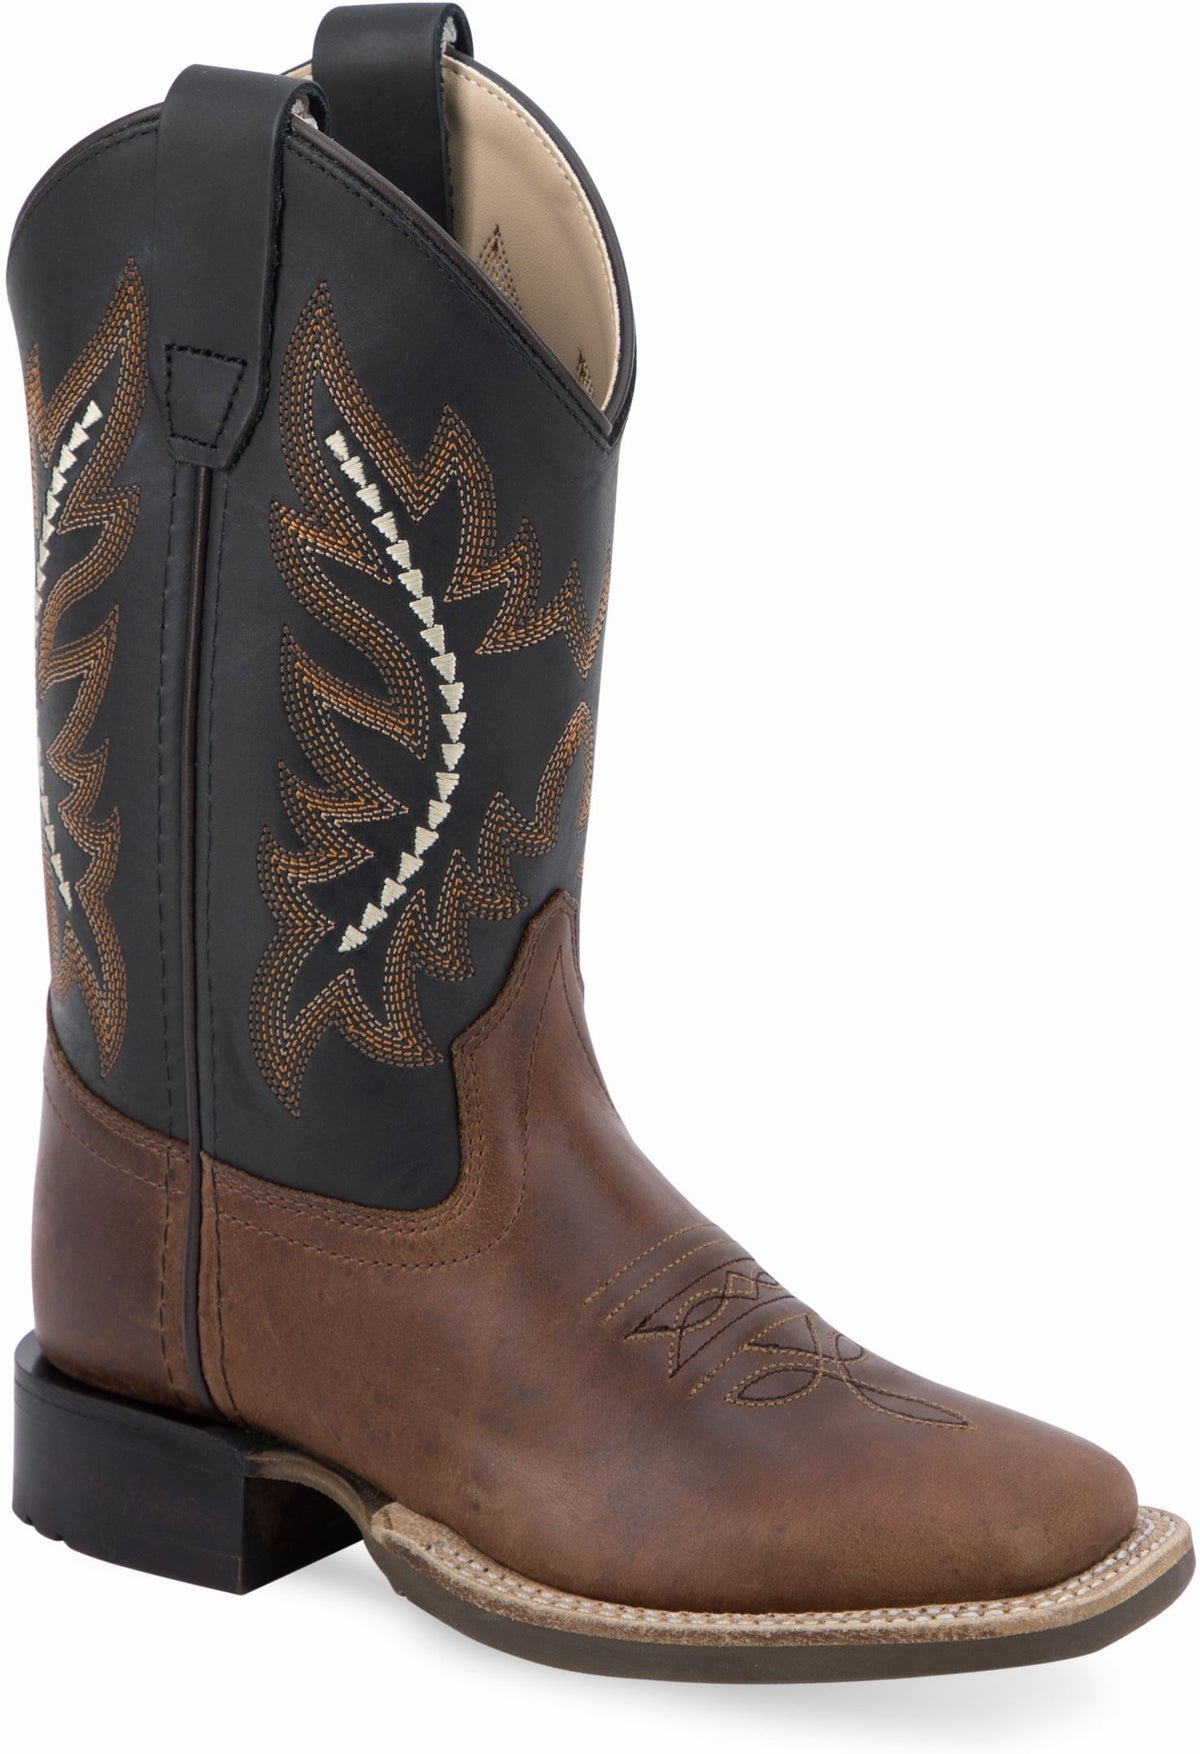 Old West Crazy Horse Light Brown Foot Black Canyon Shaft Youth's Broad Square Toe Boots